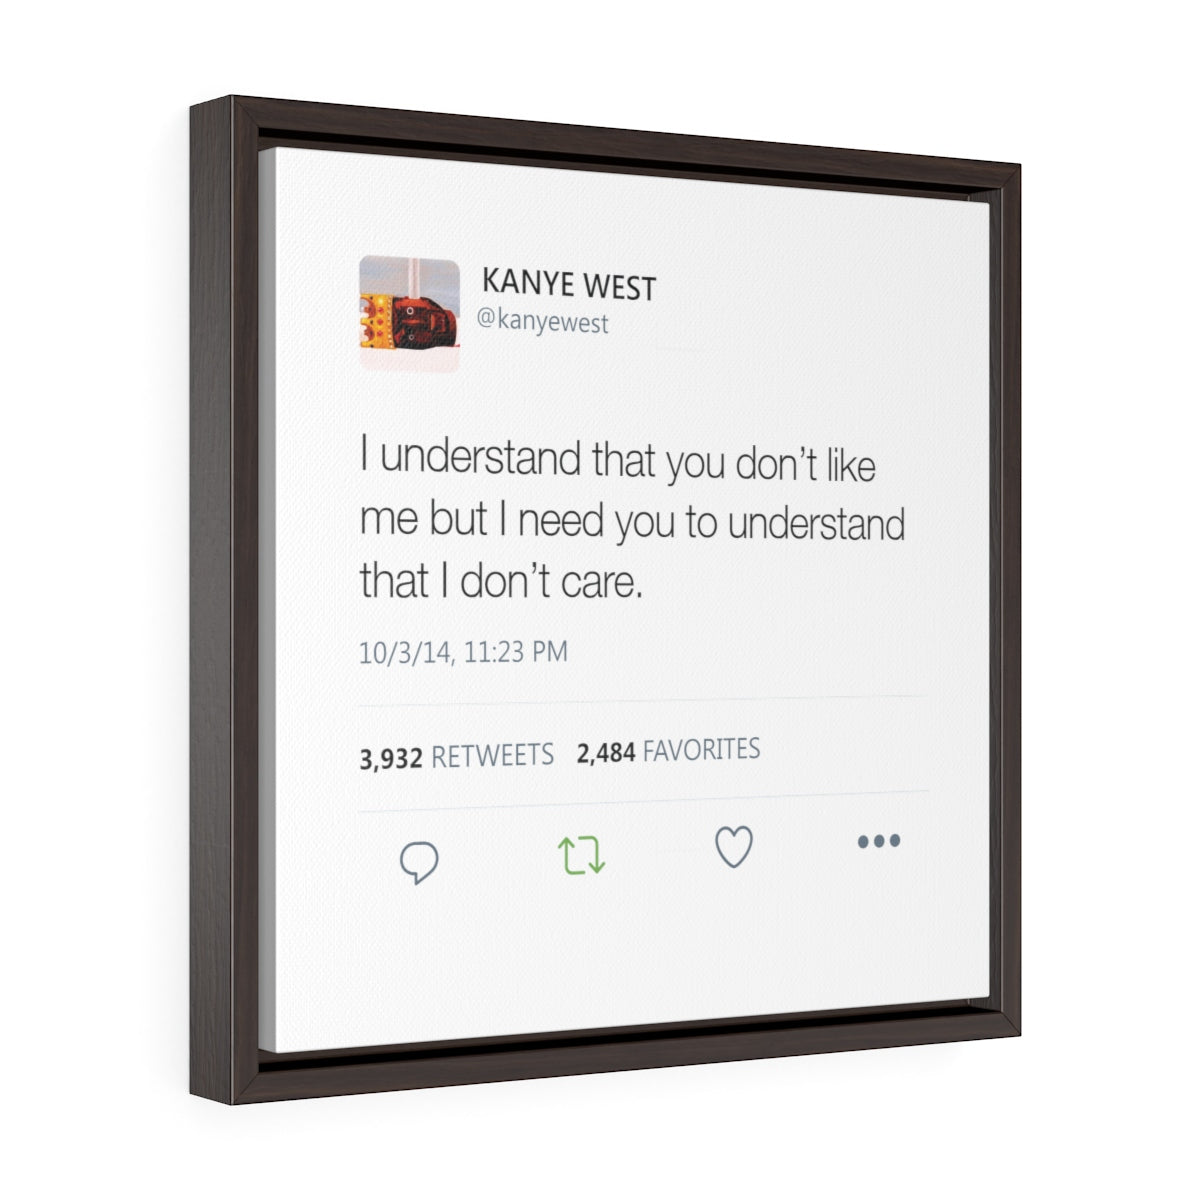 I understand that you don't like me but I need you to understand that I don't care. Kanye West Tweet Quote Square Framed Gallery Wrap Canvas-16″ × 16″-Archethype